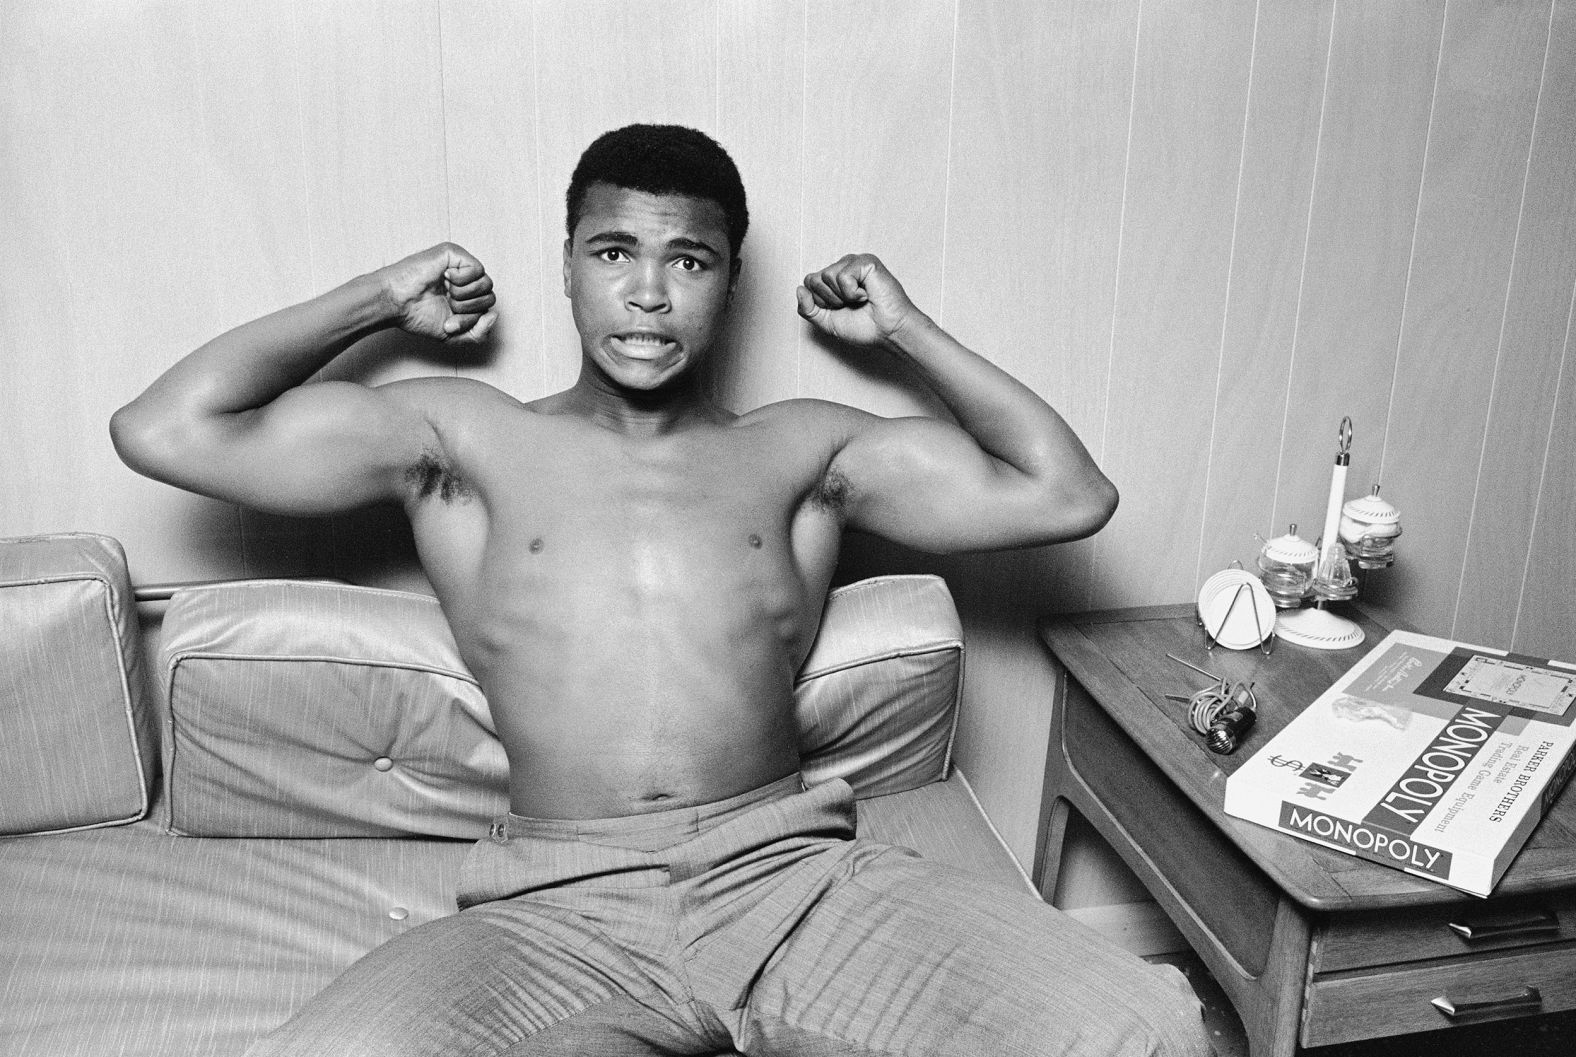 Boxing great Muhammad Ali strikes a playful pose in Louisville, Kentucky, in 1963. Schapiro was on assignment for Sports Illustrated, and this was early in the boxer's career. Schapiro said he saw a different side of Ali. "He really was extremely quiet and incredibly polite — in every way, just a terrific person," <a href="index.php?page=&url=https%3A%2F%2Fwww.rollingstone.com%2Fculture%2Fculture-features%2Fsteve-schapiro-muhammad-ali-boxer-photos-cassius-clay-704087%2F" target="_blank" target="_blank">Schapiro told Rolling Stone in 2018.</a>